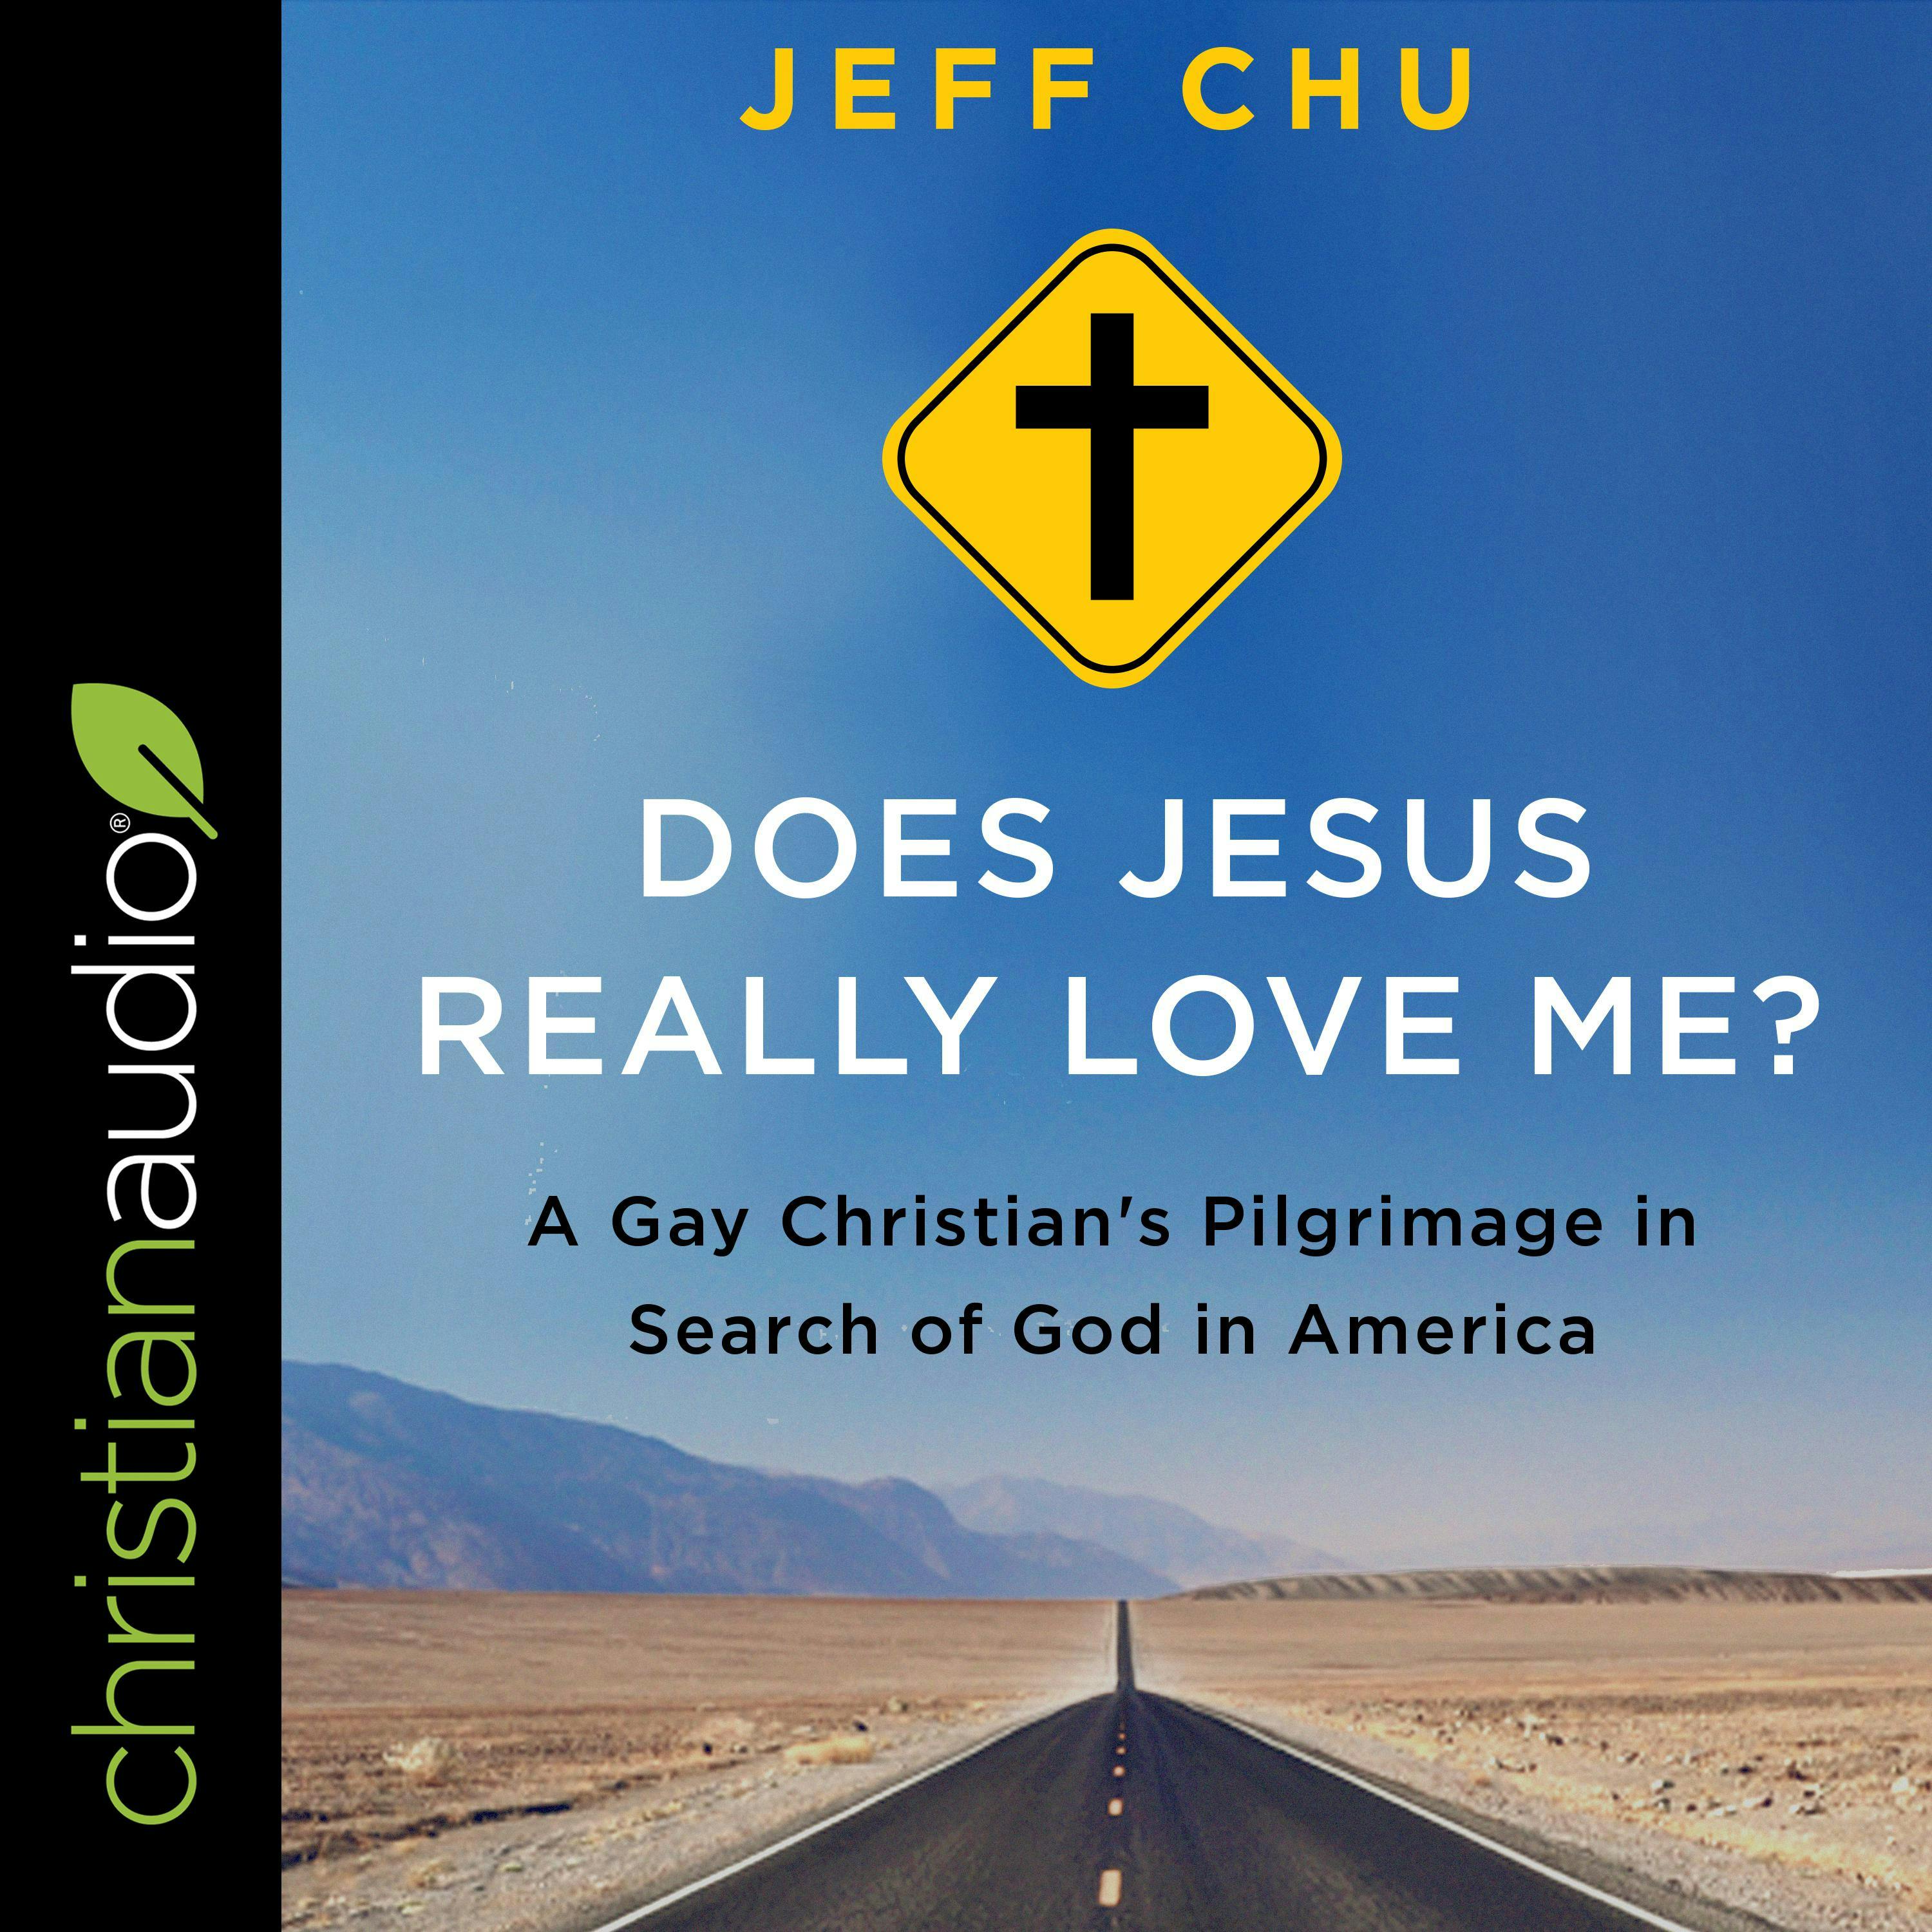 Does Jesus Really Love Me?: A Gay Christian's Pilgrimage in Search of God in America - Jeff Chu